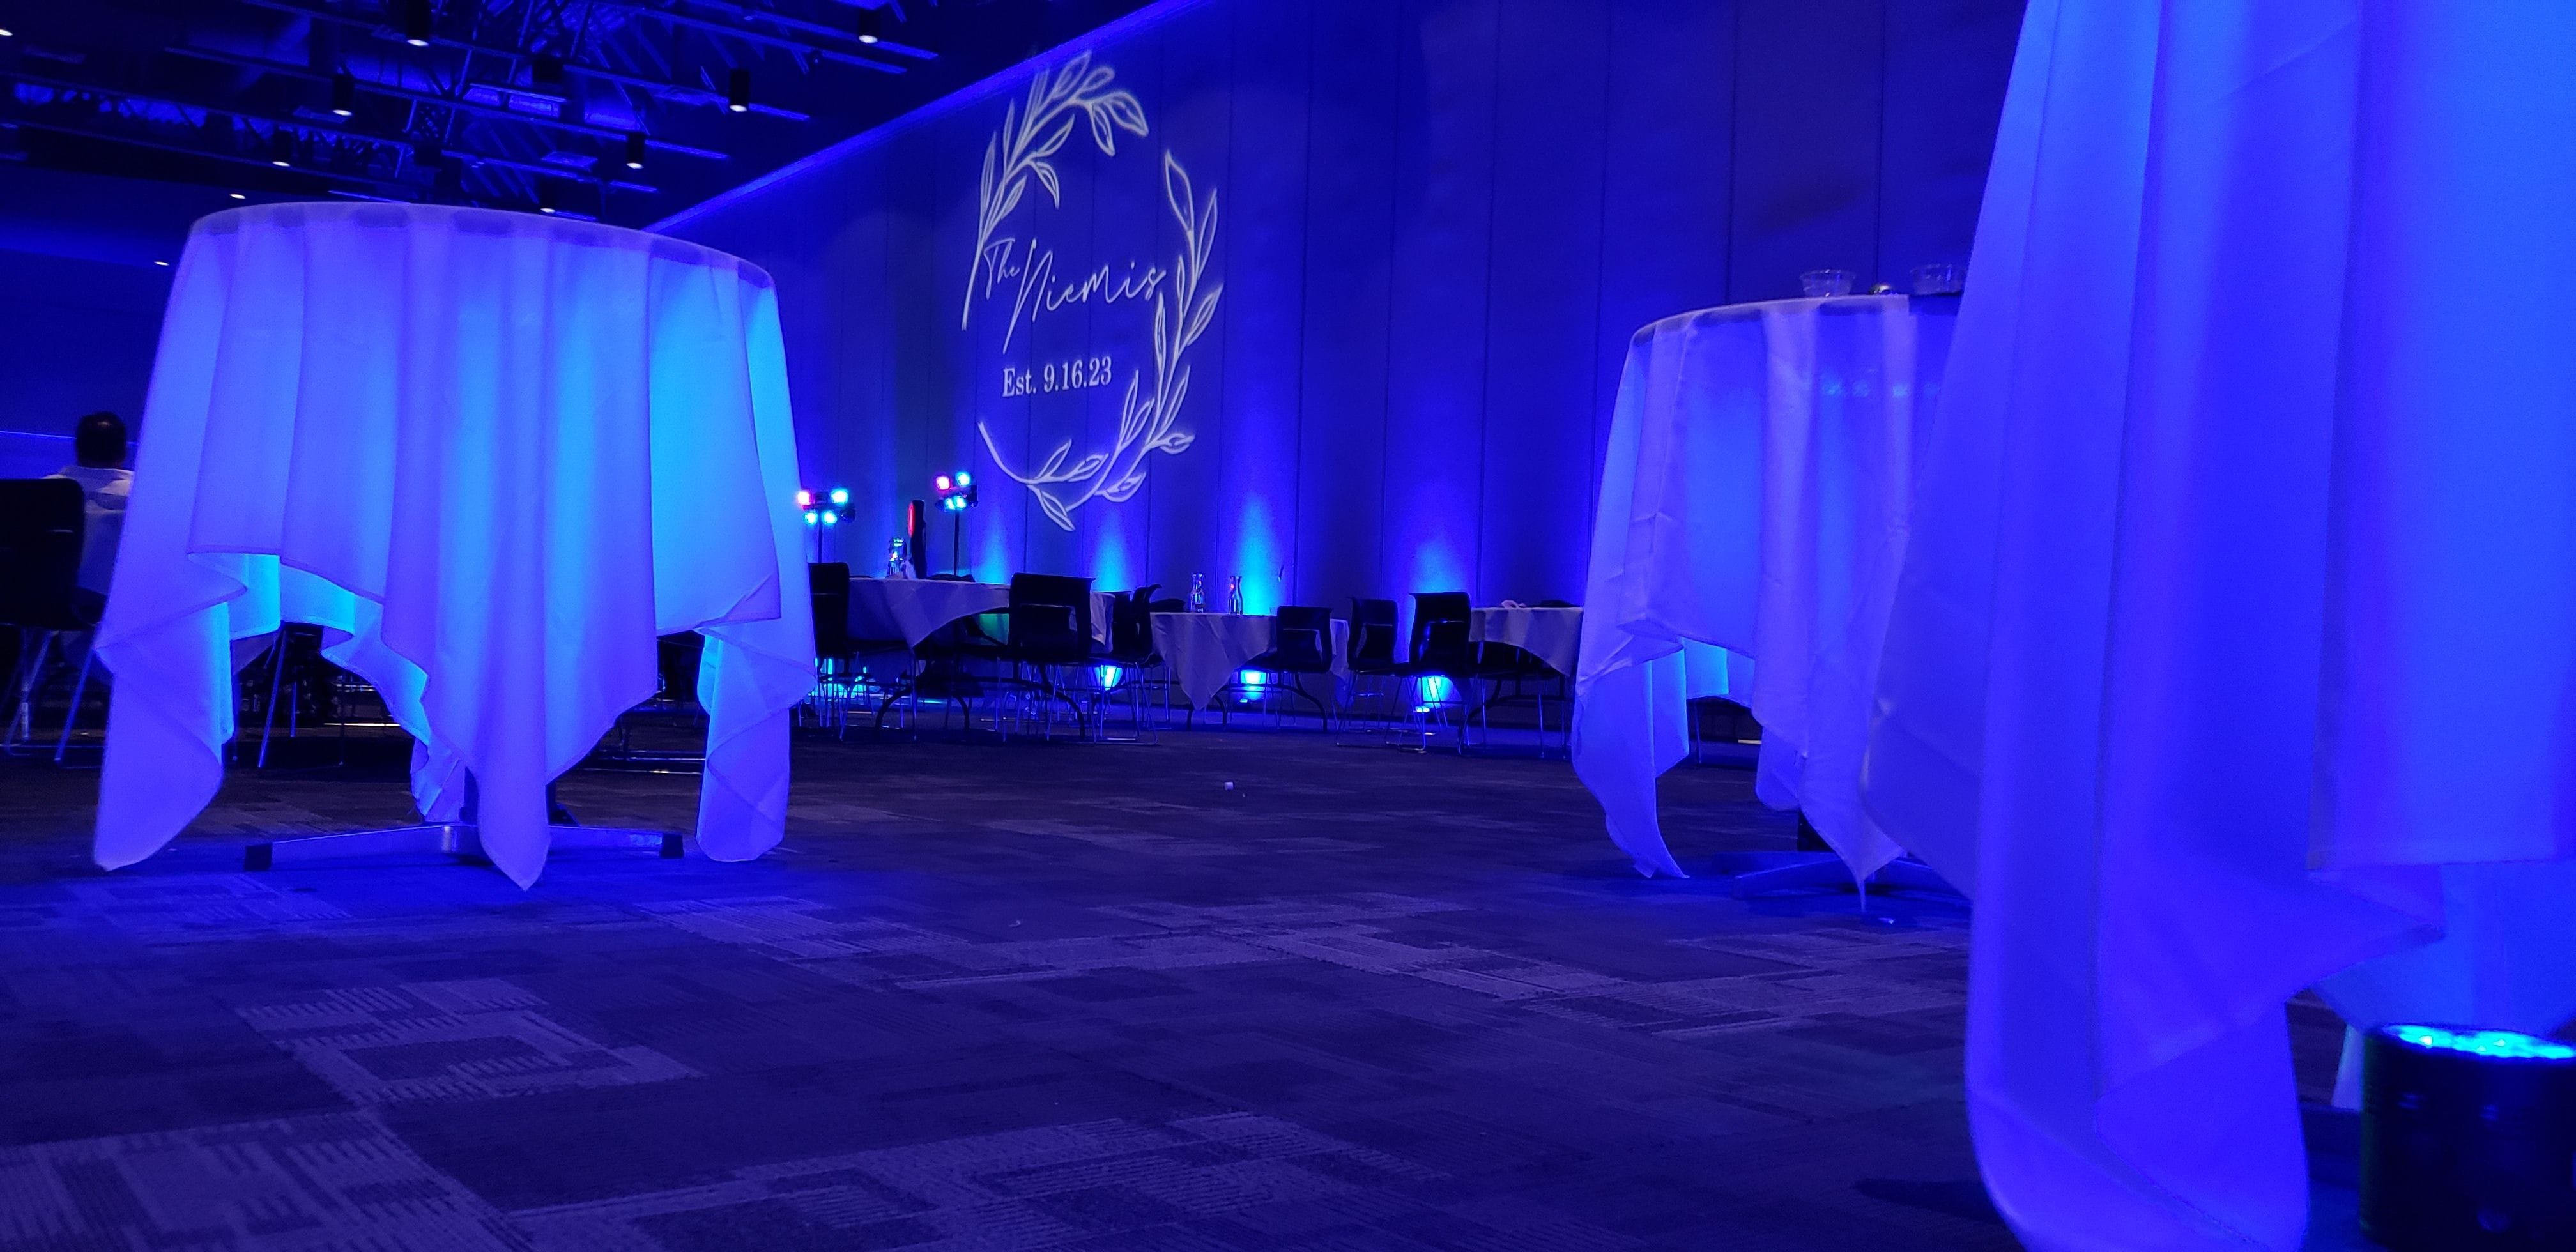 battery lights under cocktail tables to make them glow in blue up lighting with a wedding monogram in the background.